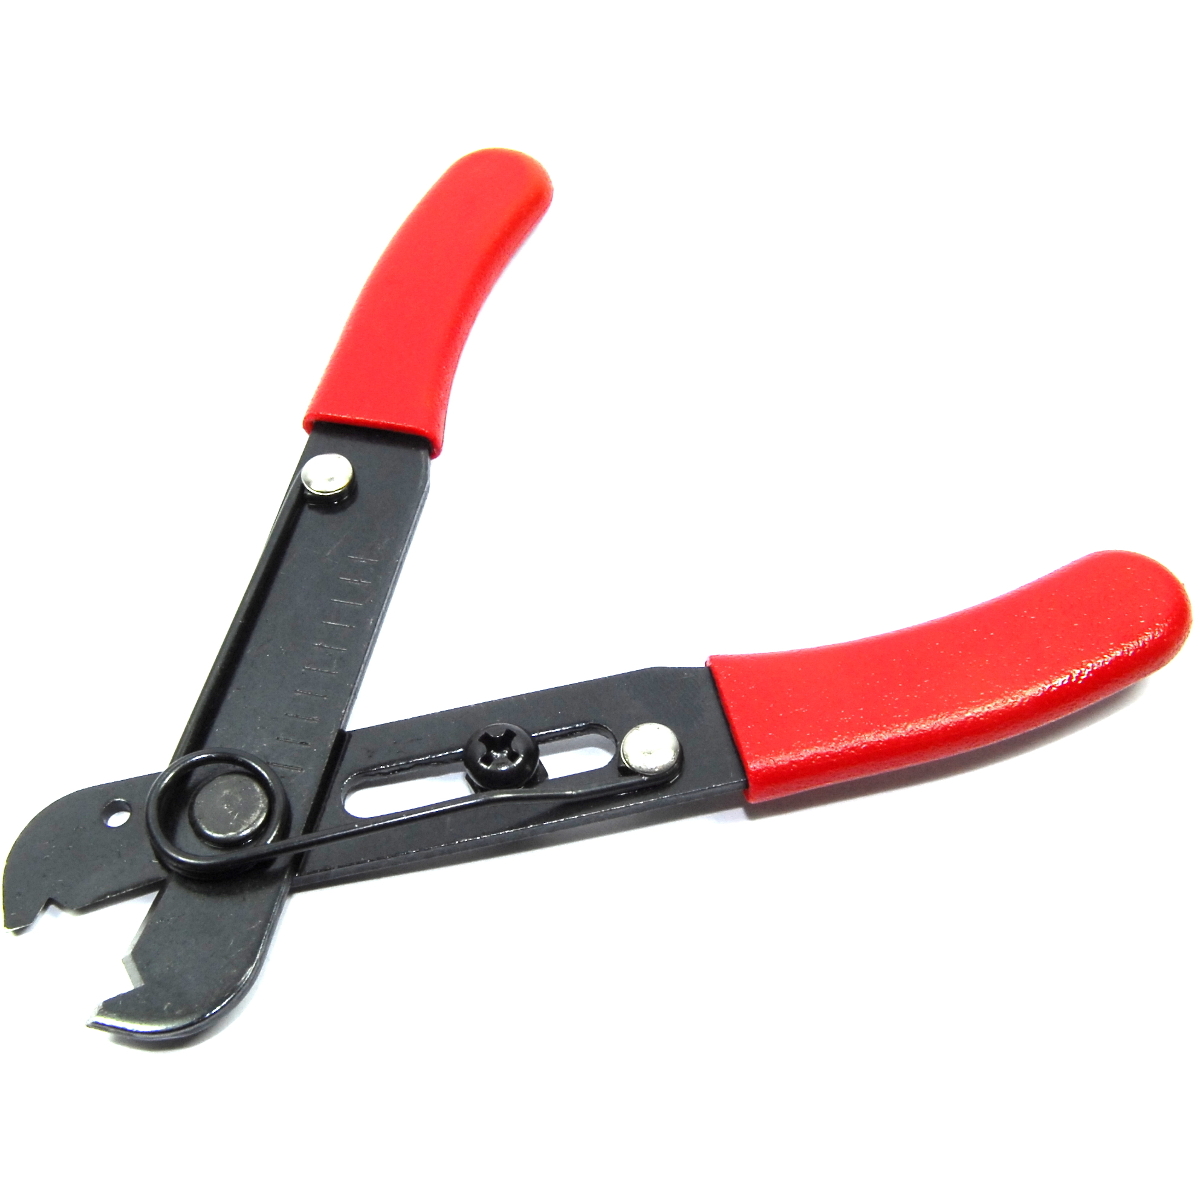 Cutter & Stripper LY-108 Image 1